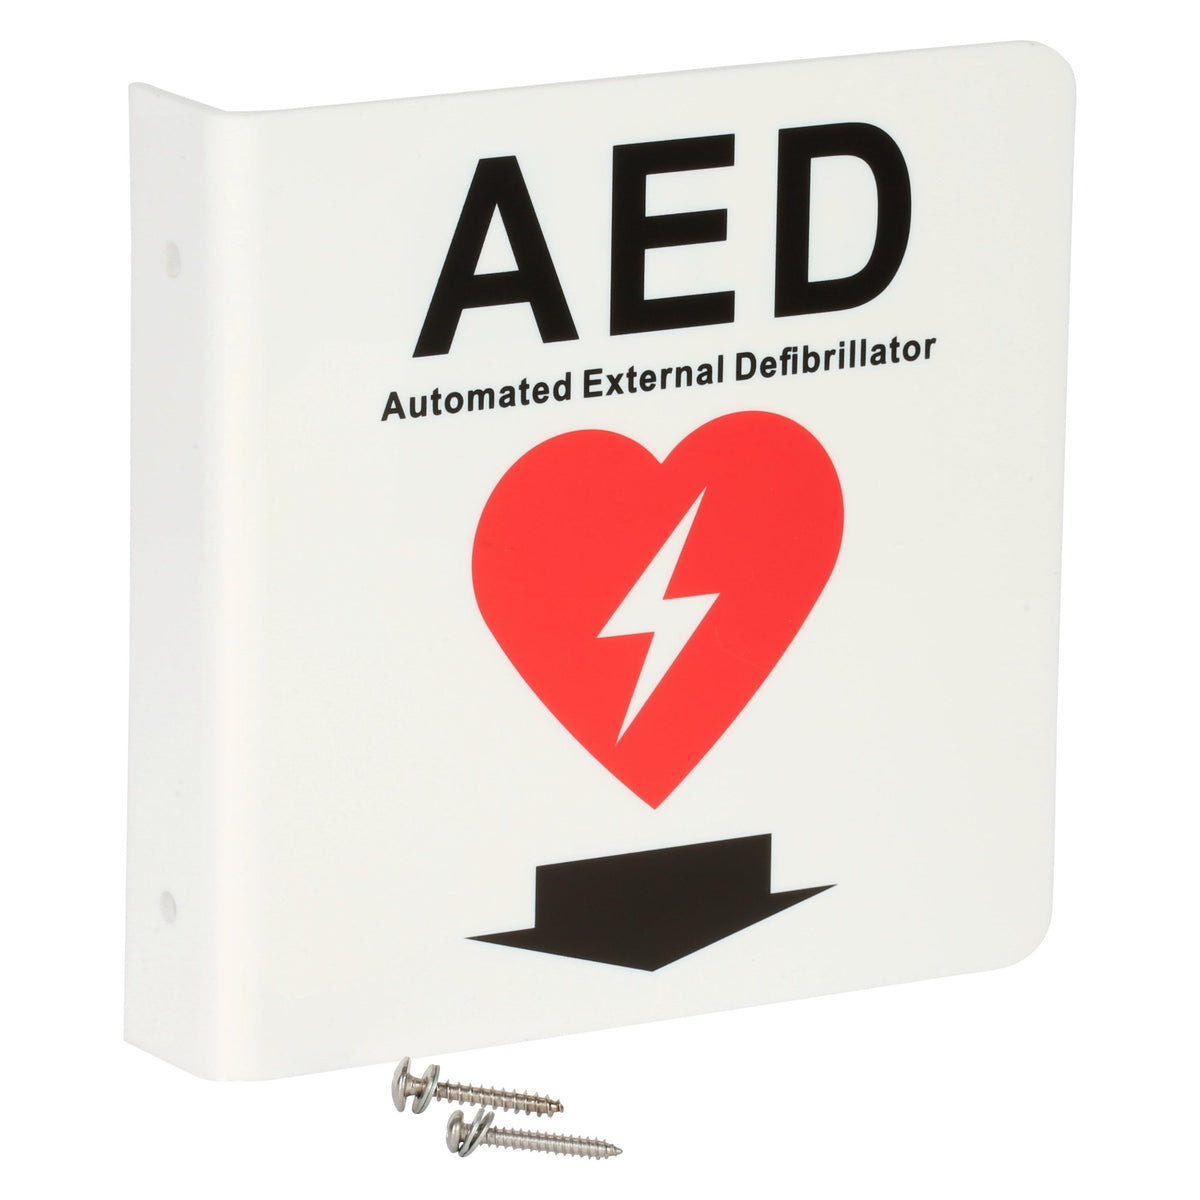 AHS Dual Sided AED Sign - American Hospital Supply